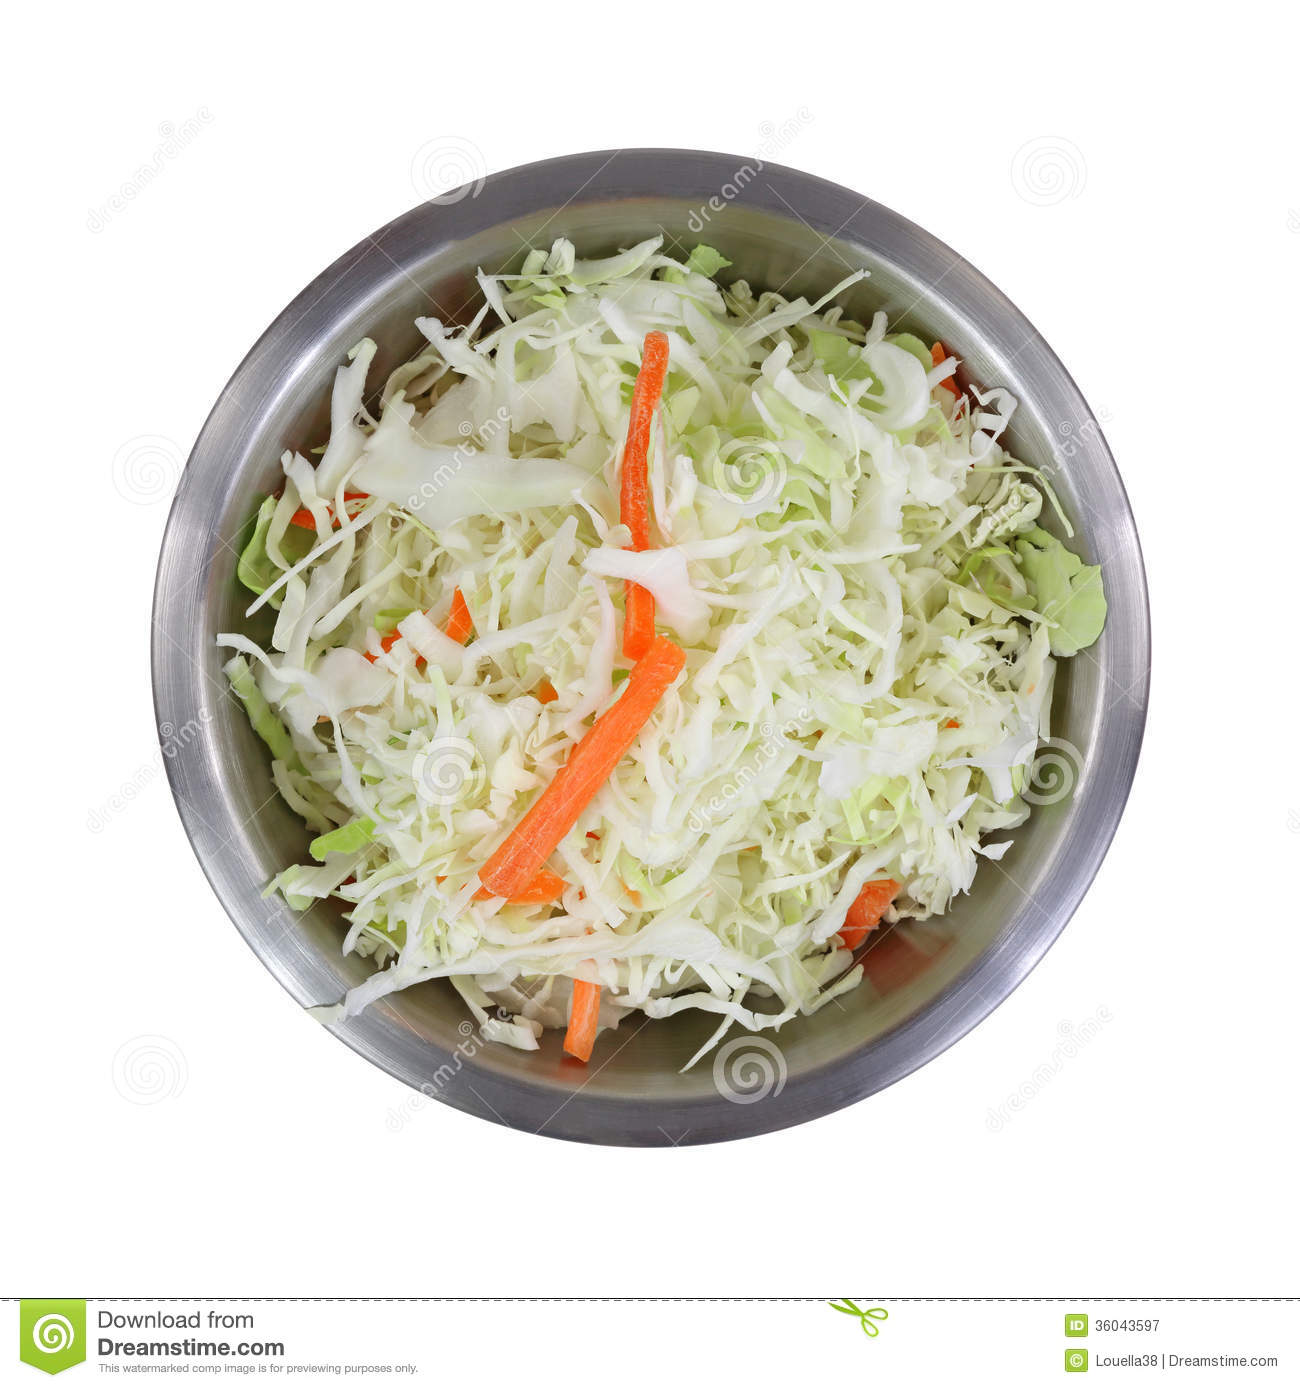 Coleslaw Stainless Steel Mixing Bowl Top View On White Royalty Free